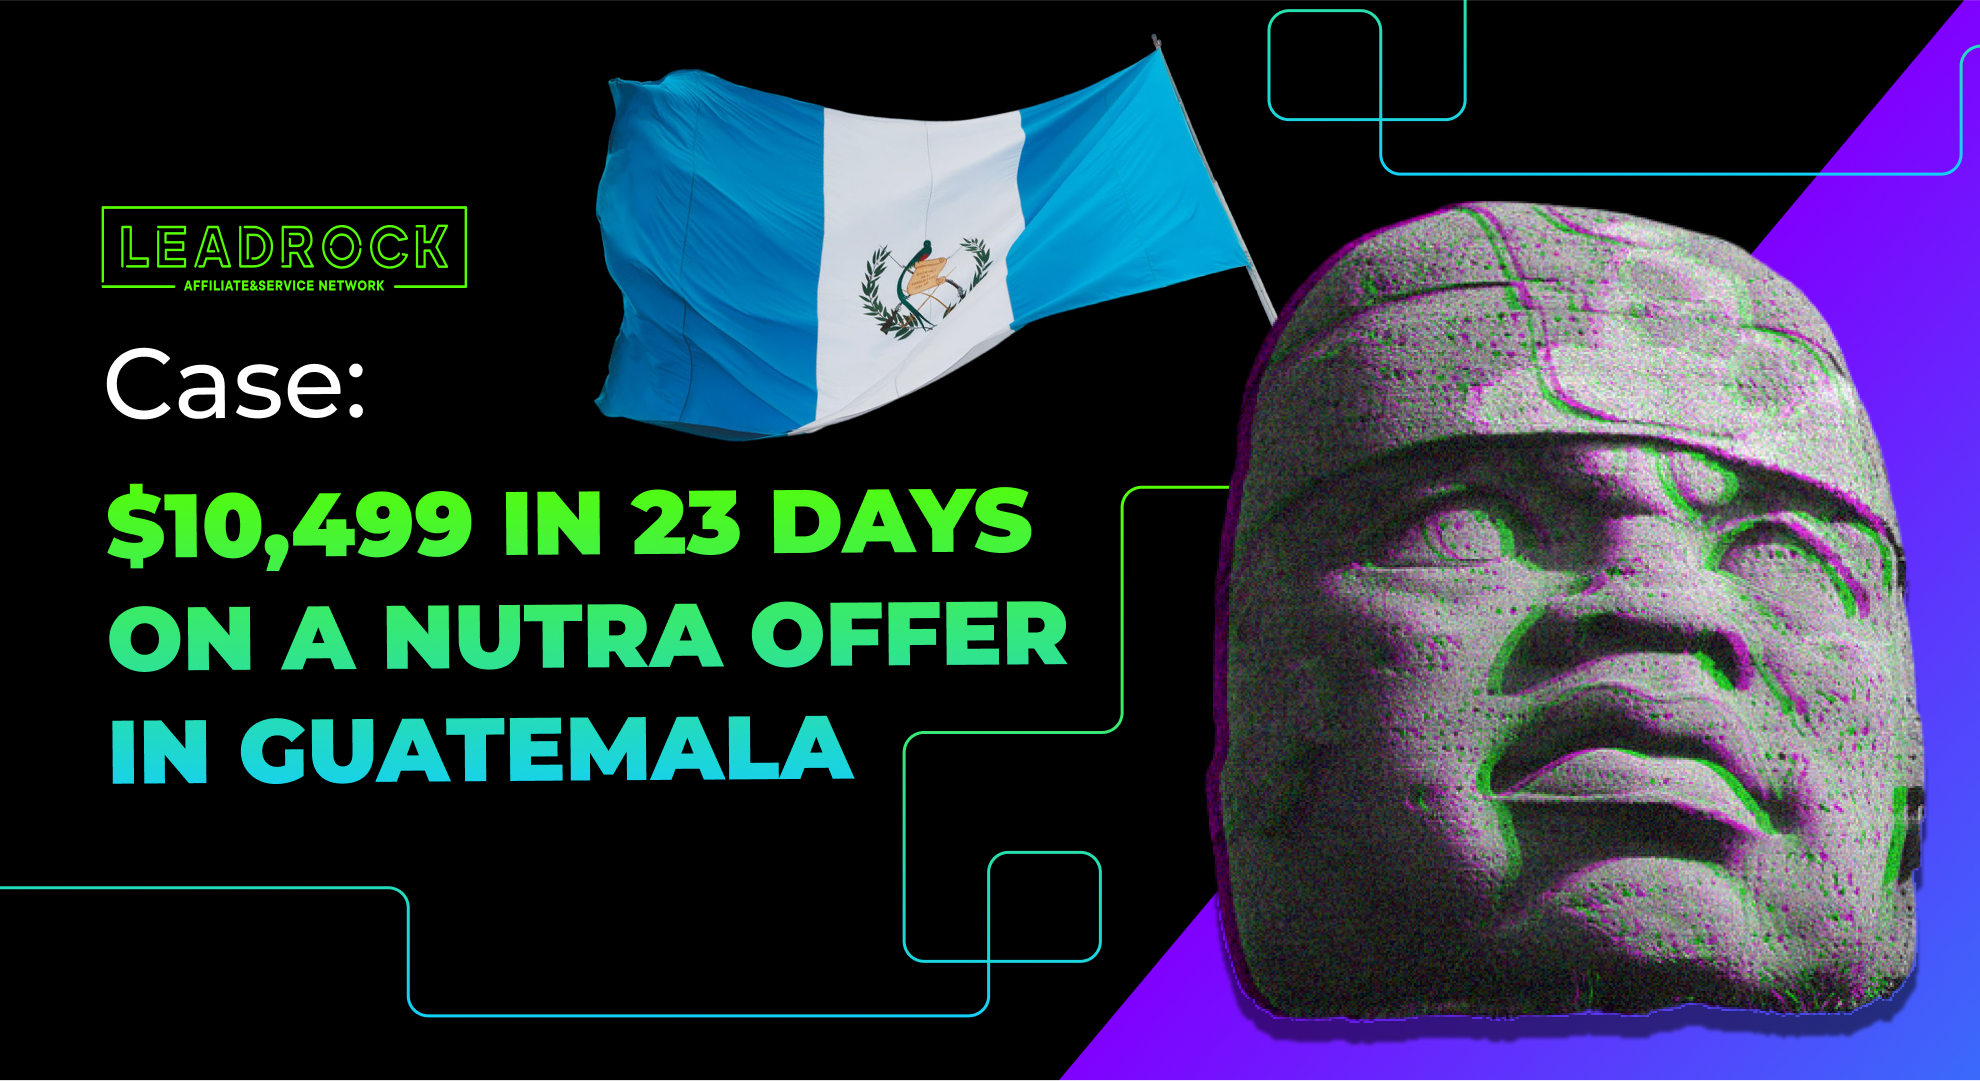 Case: $10,499 in 23 days on a nutra offer in Guatemala